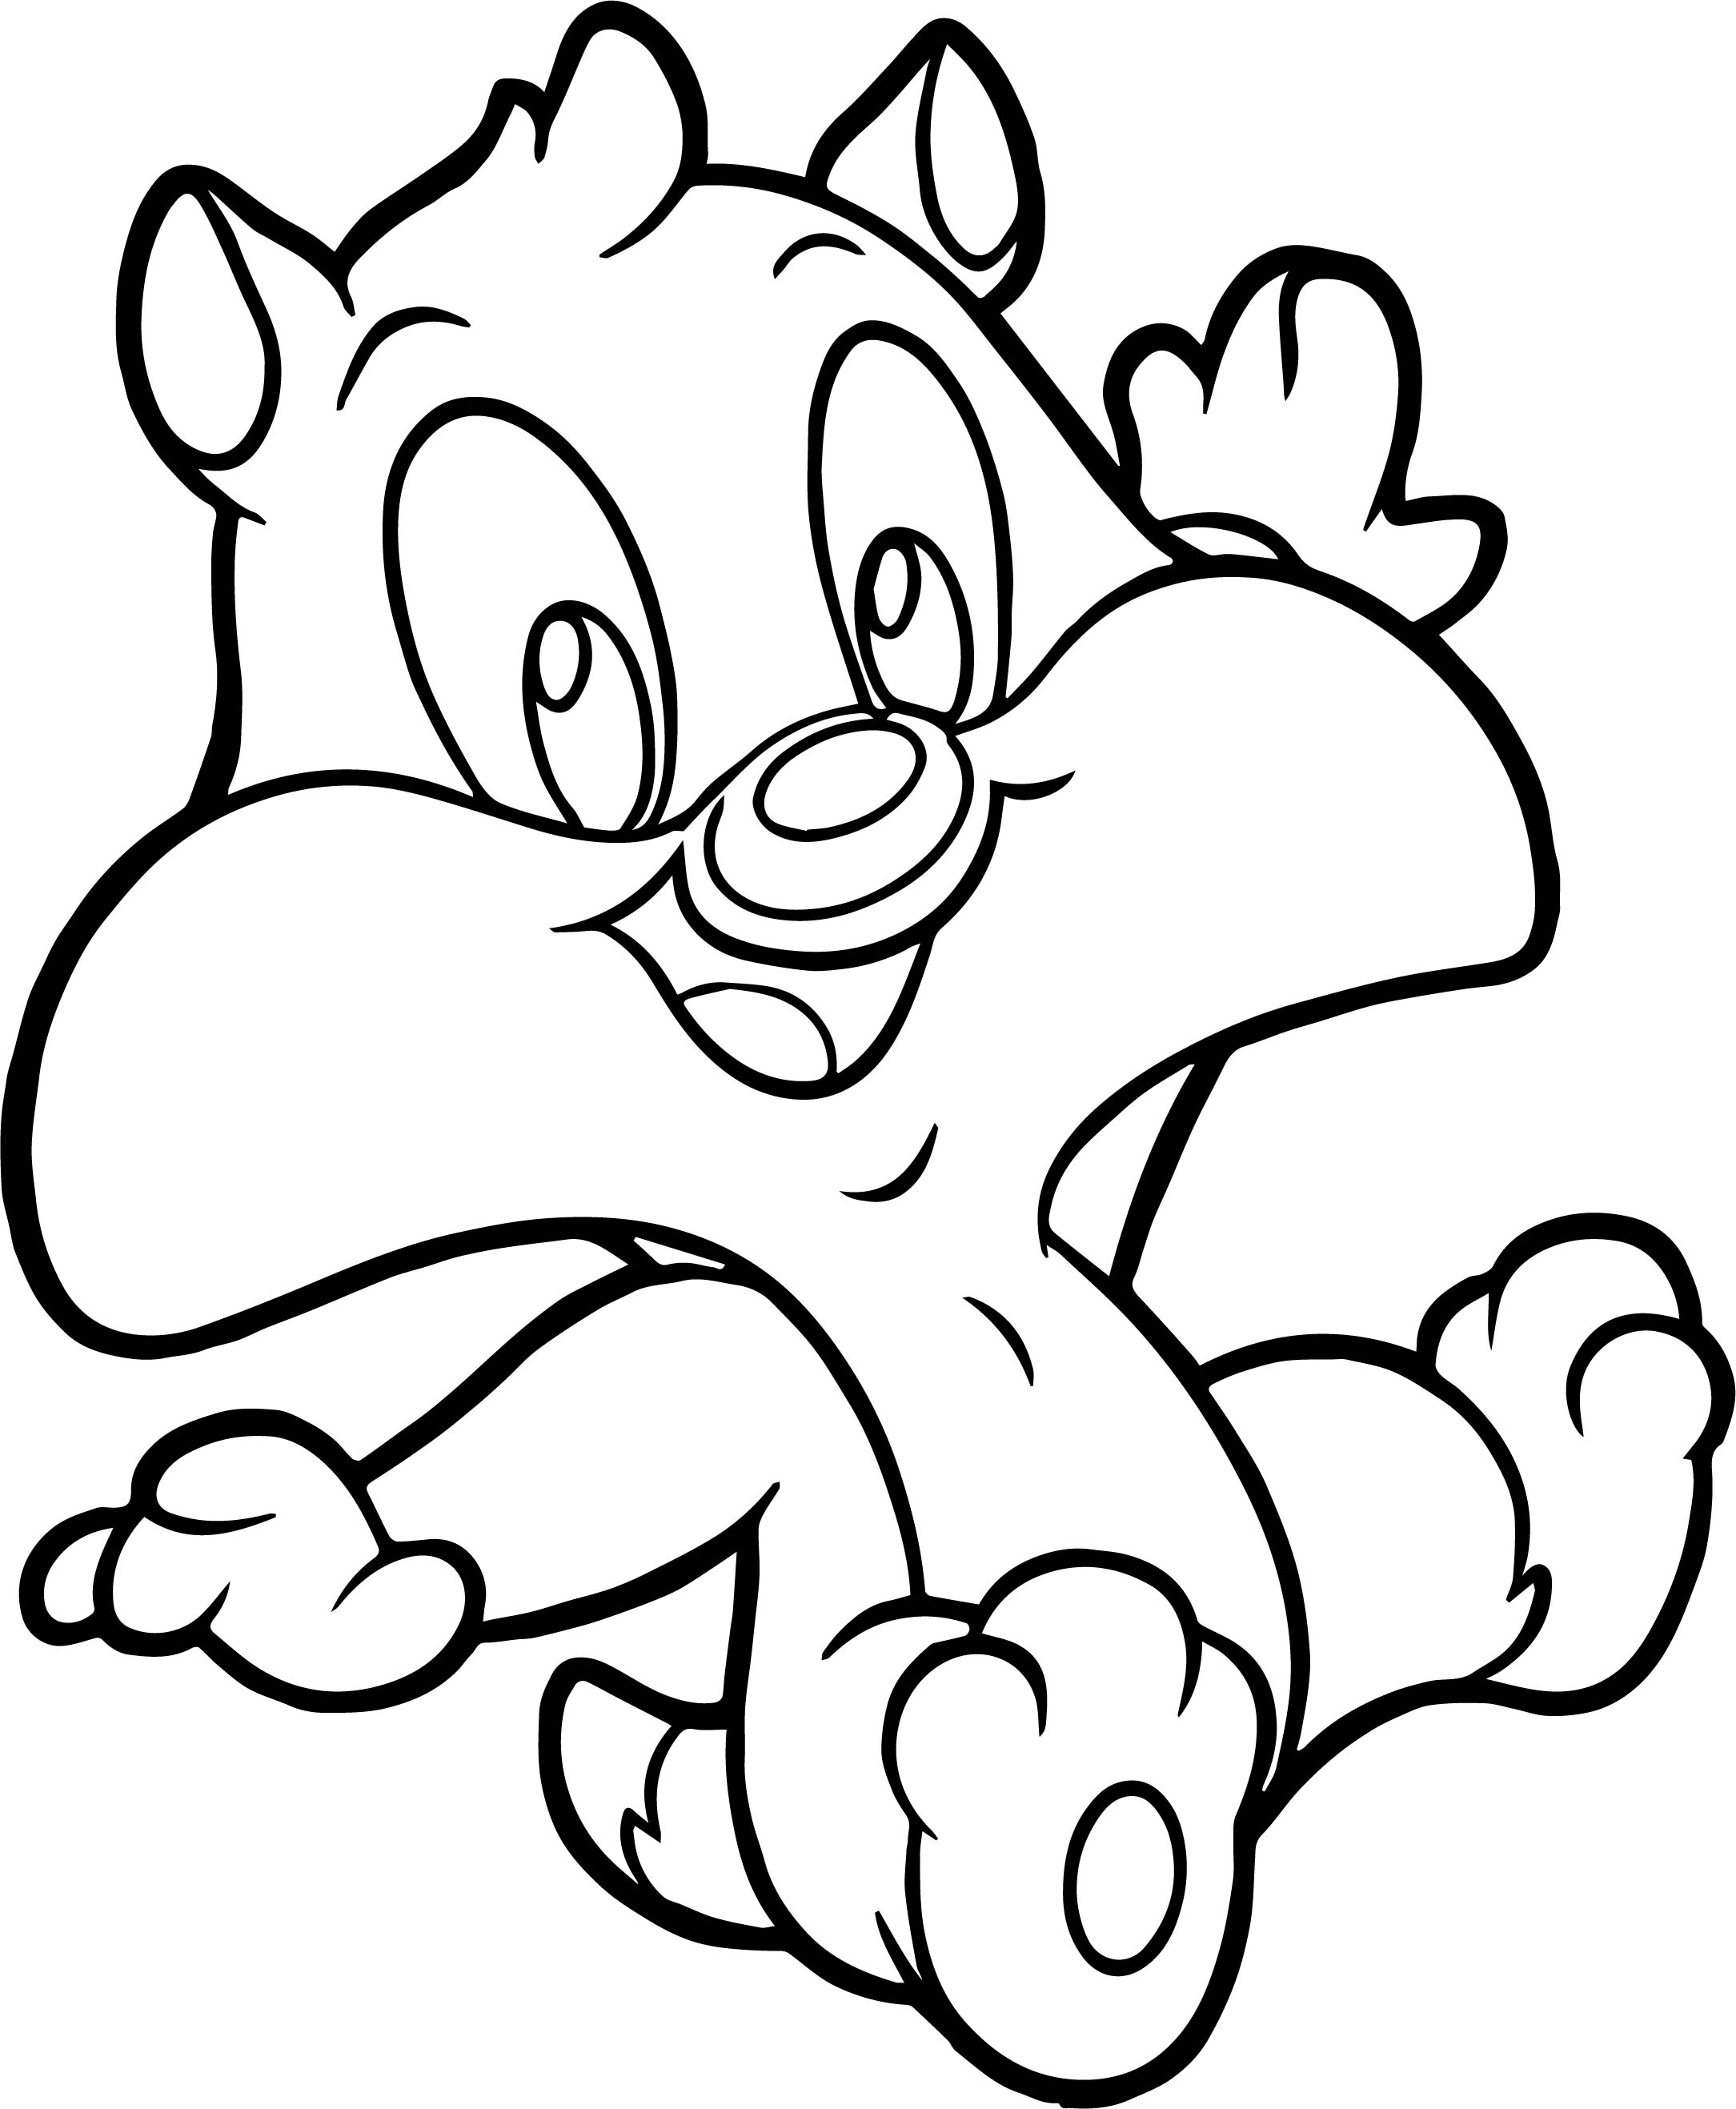 Taz Cartoon Coloring Pages Looney Tunes Cat Coloring Page Free Pages Of Taz Best Free